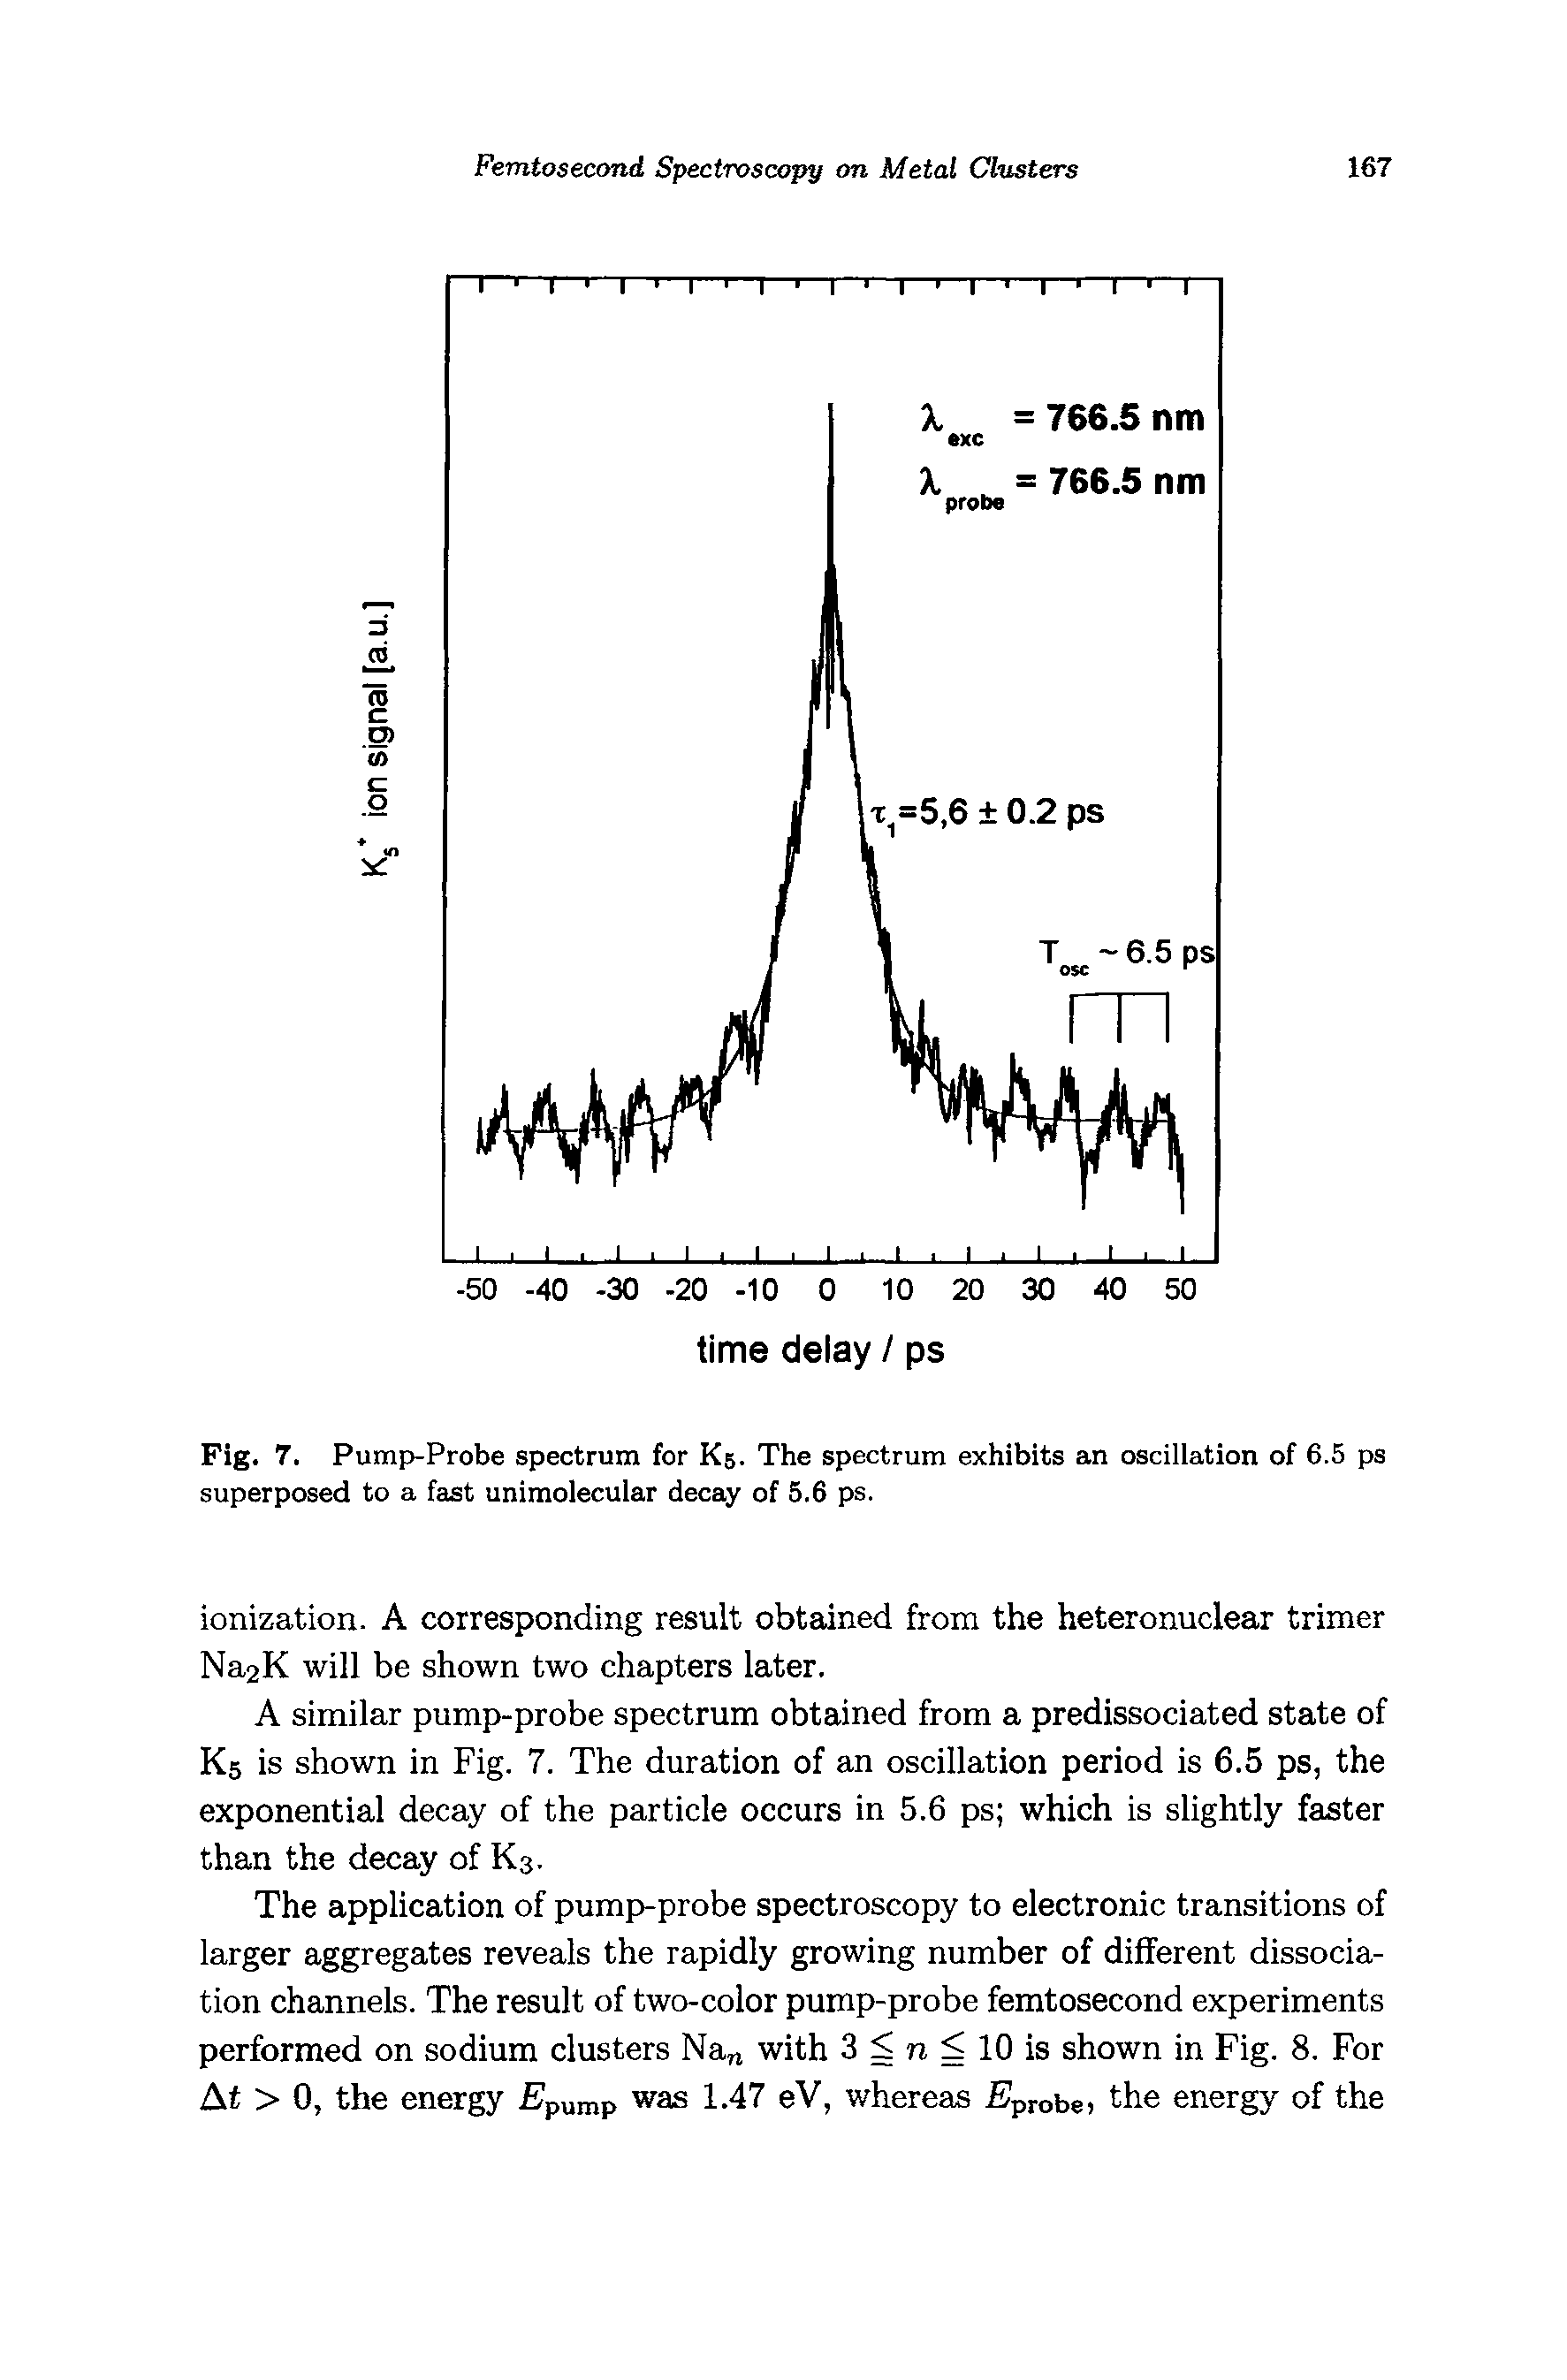 Fig. 7. Pump-Probe spectrum for K5. The spectrum exhibits an oscillation of 6.5 ps superposed to a fast unimolecular decay of 5.6 ps.